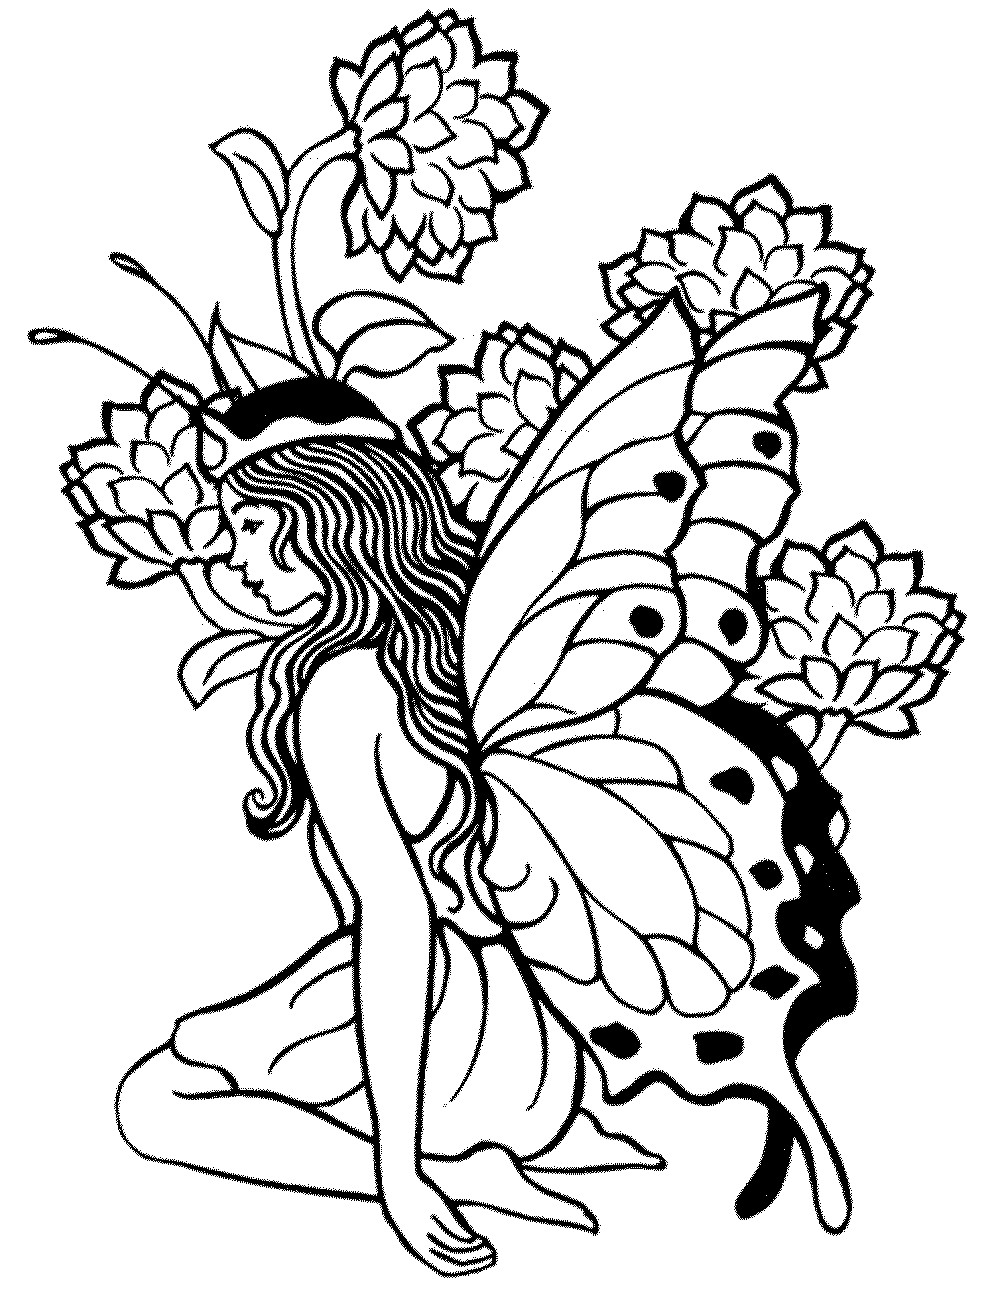 Free Printable Coloring Pages For Adults
 Free Coloring Pages For Adults Printable Detailed Image 23